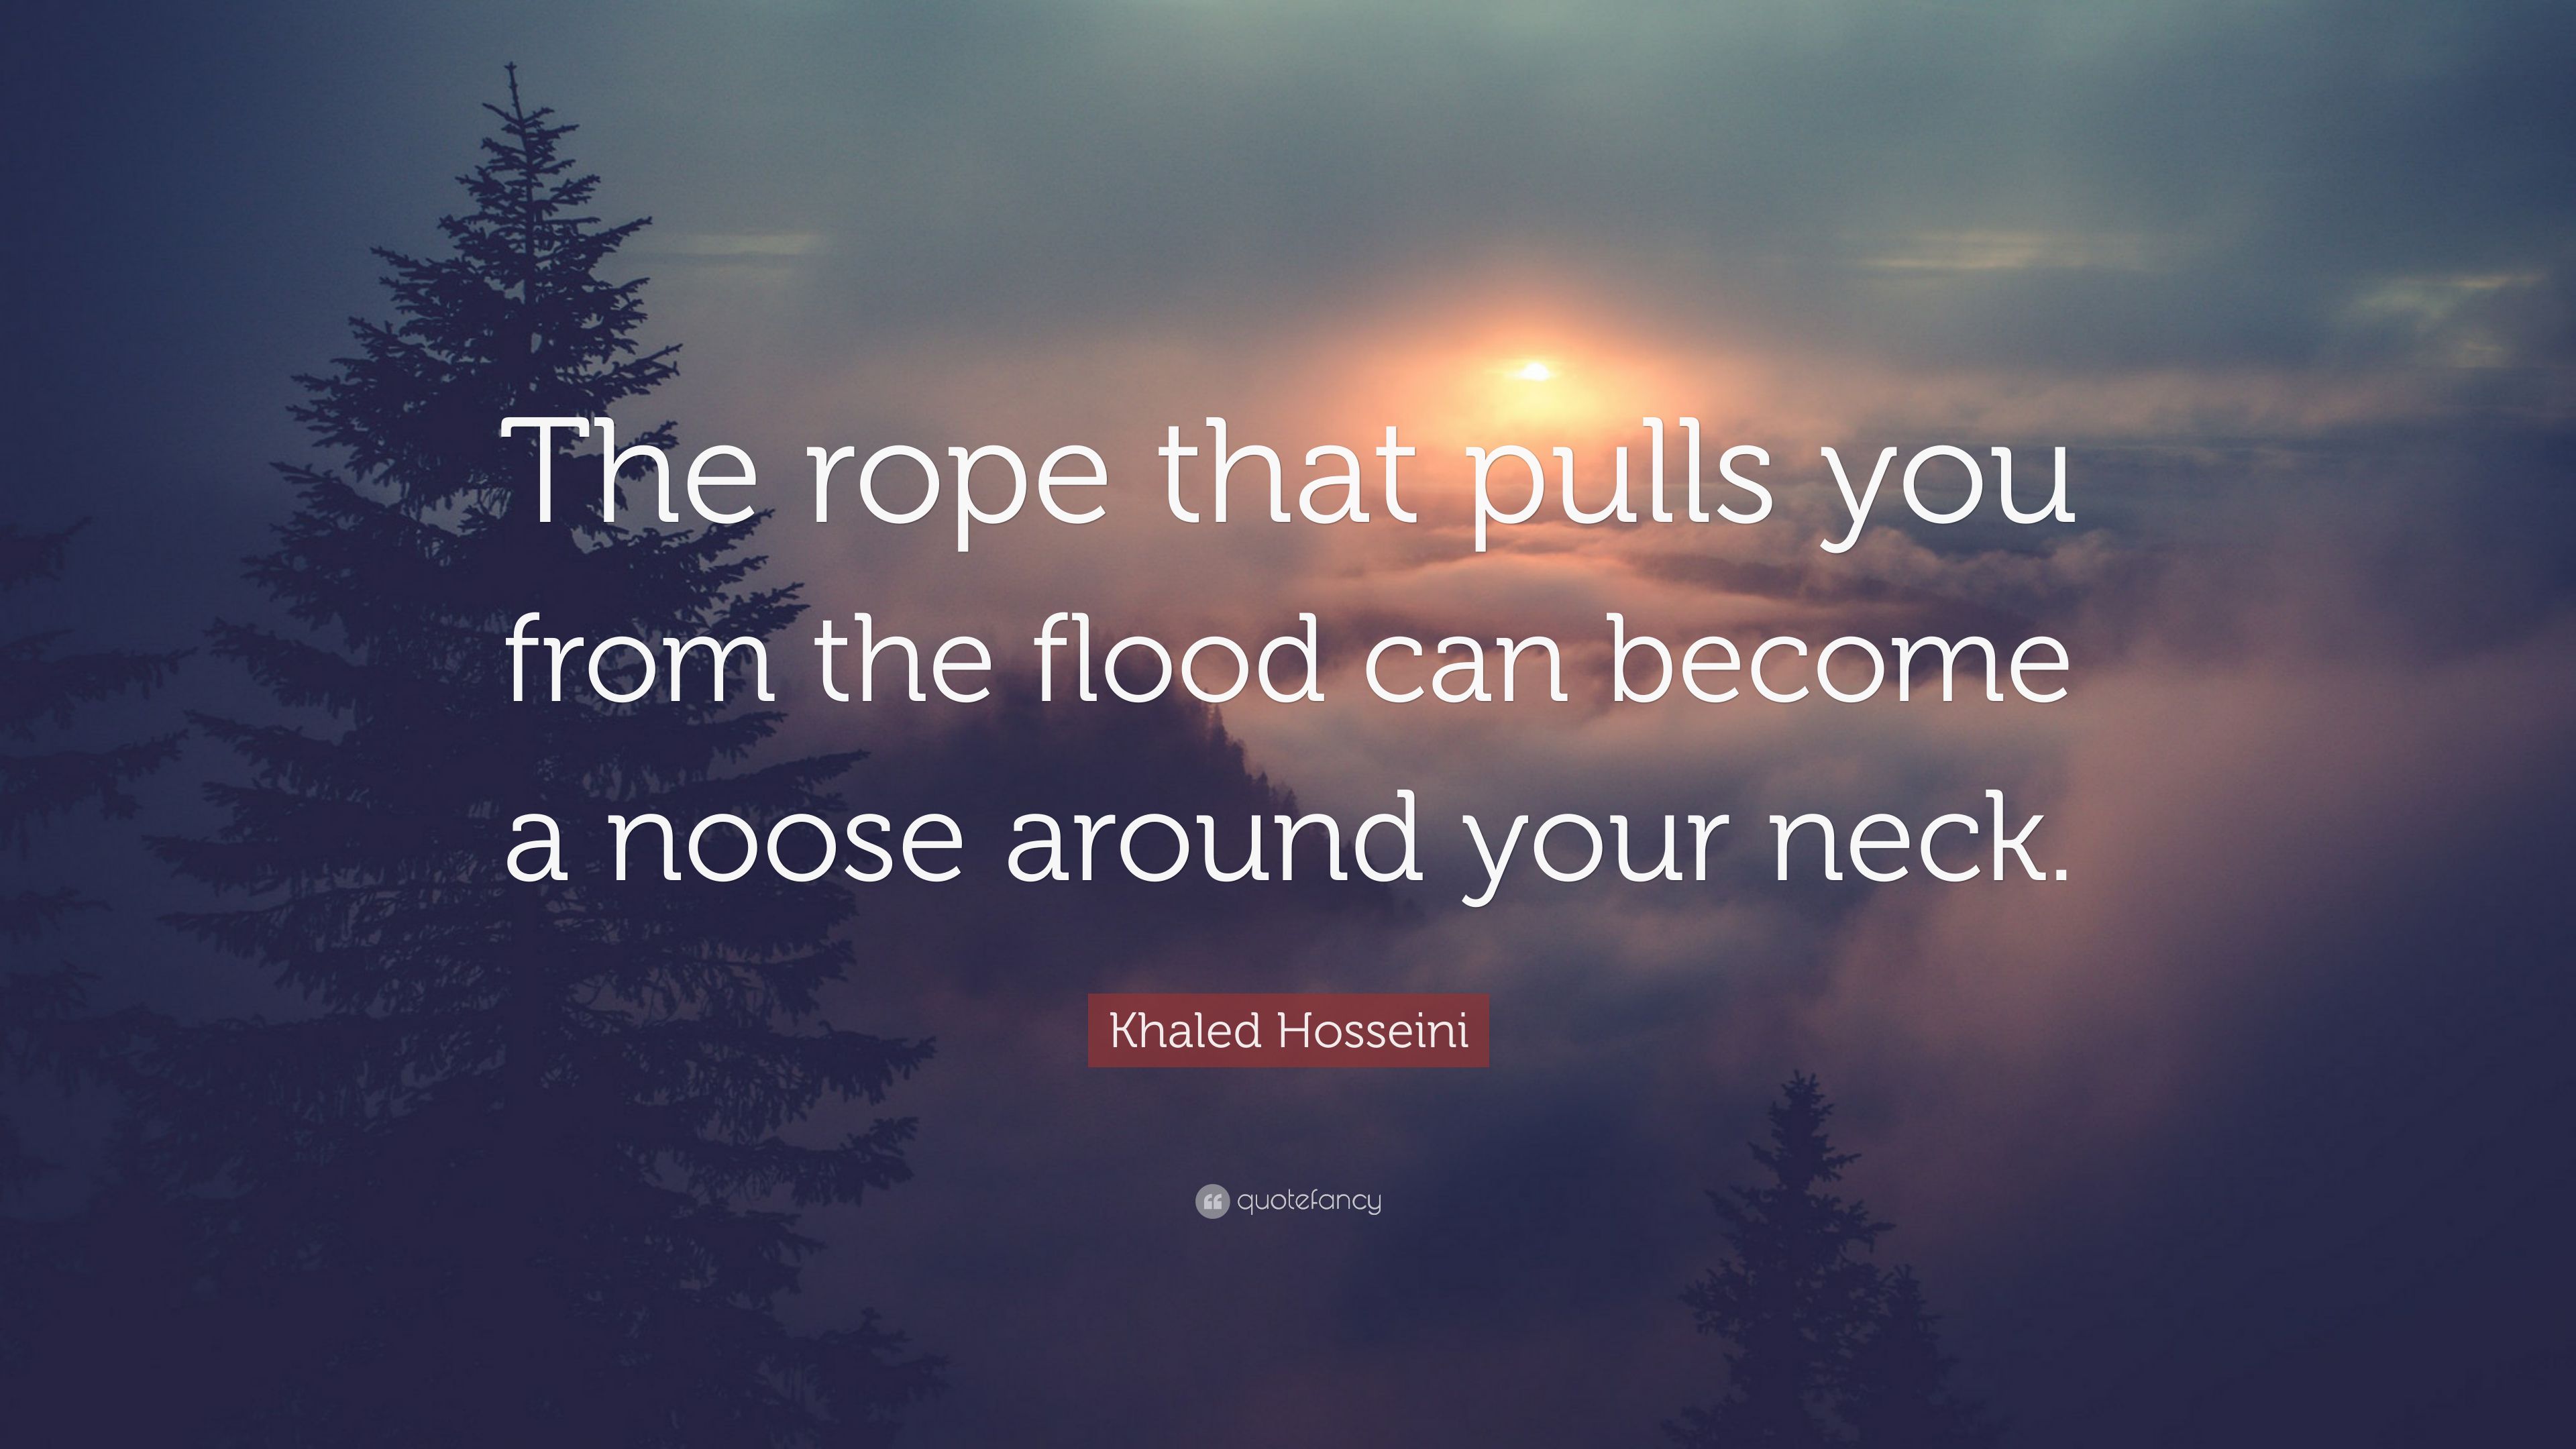 Khaled Hosseini Quote: “The rope that pulls you from the flood can